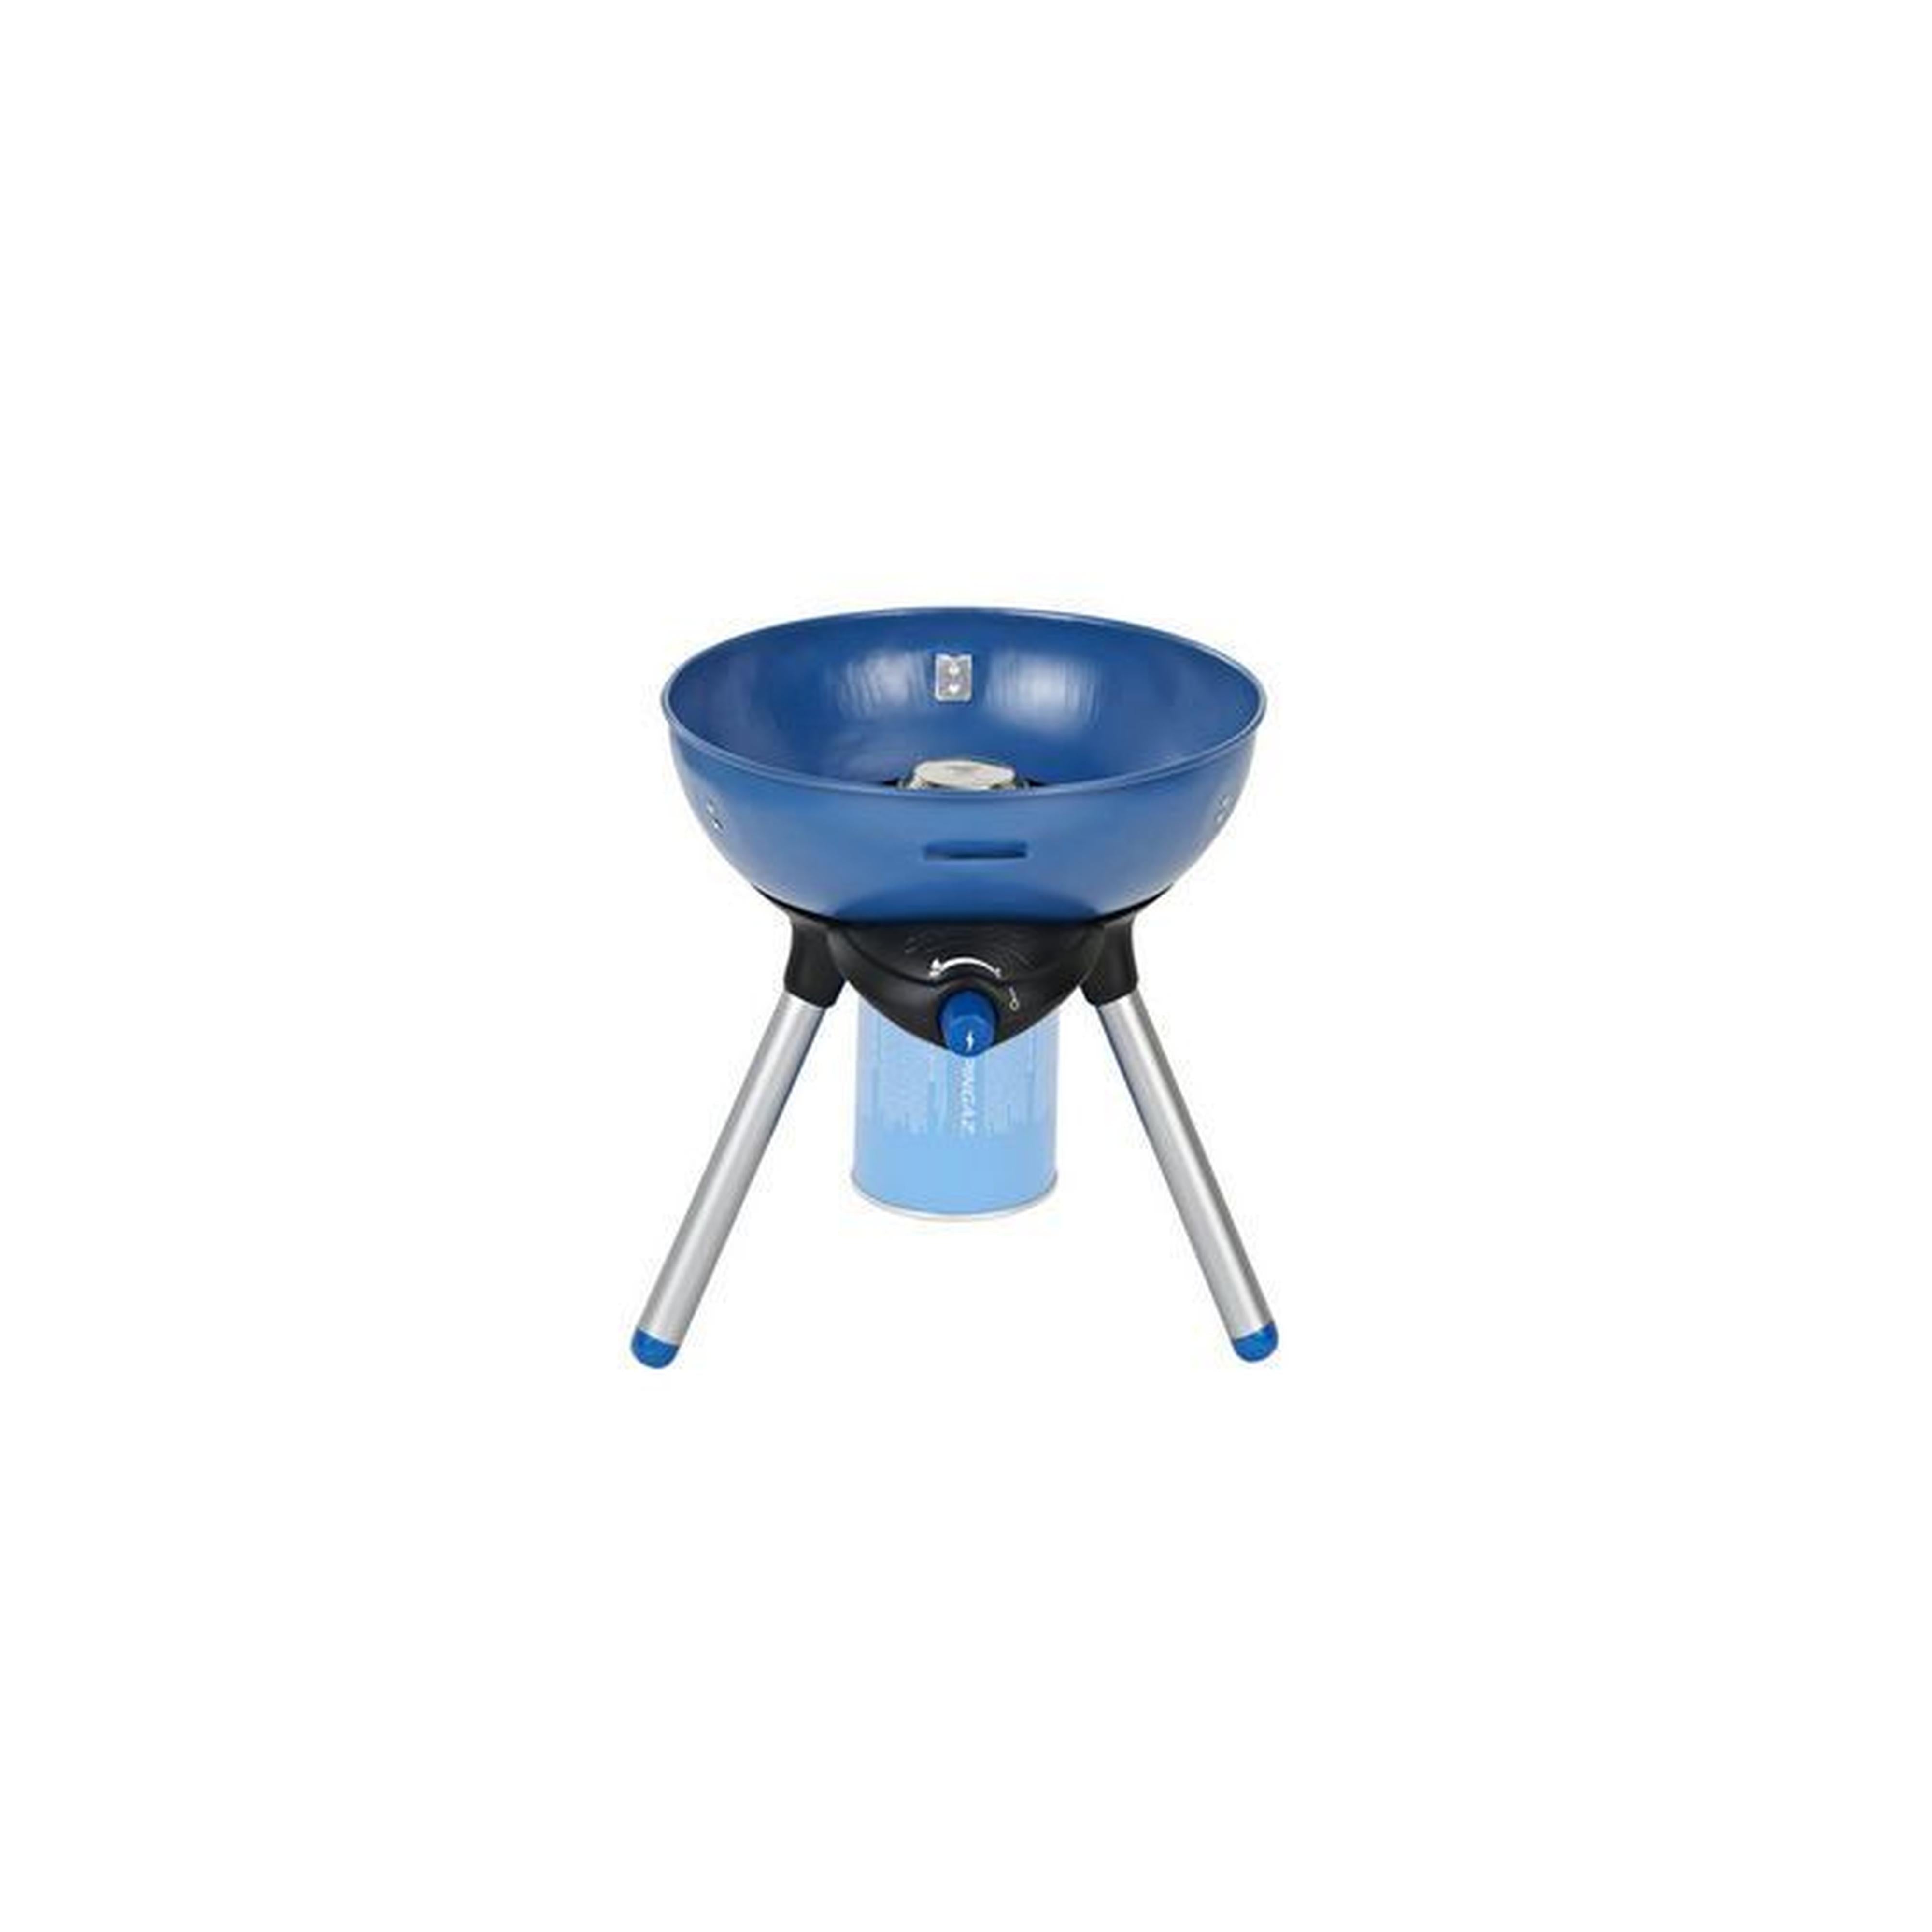 Campingaz Party Grill 200 BBQ Stove